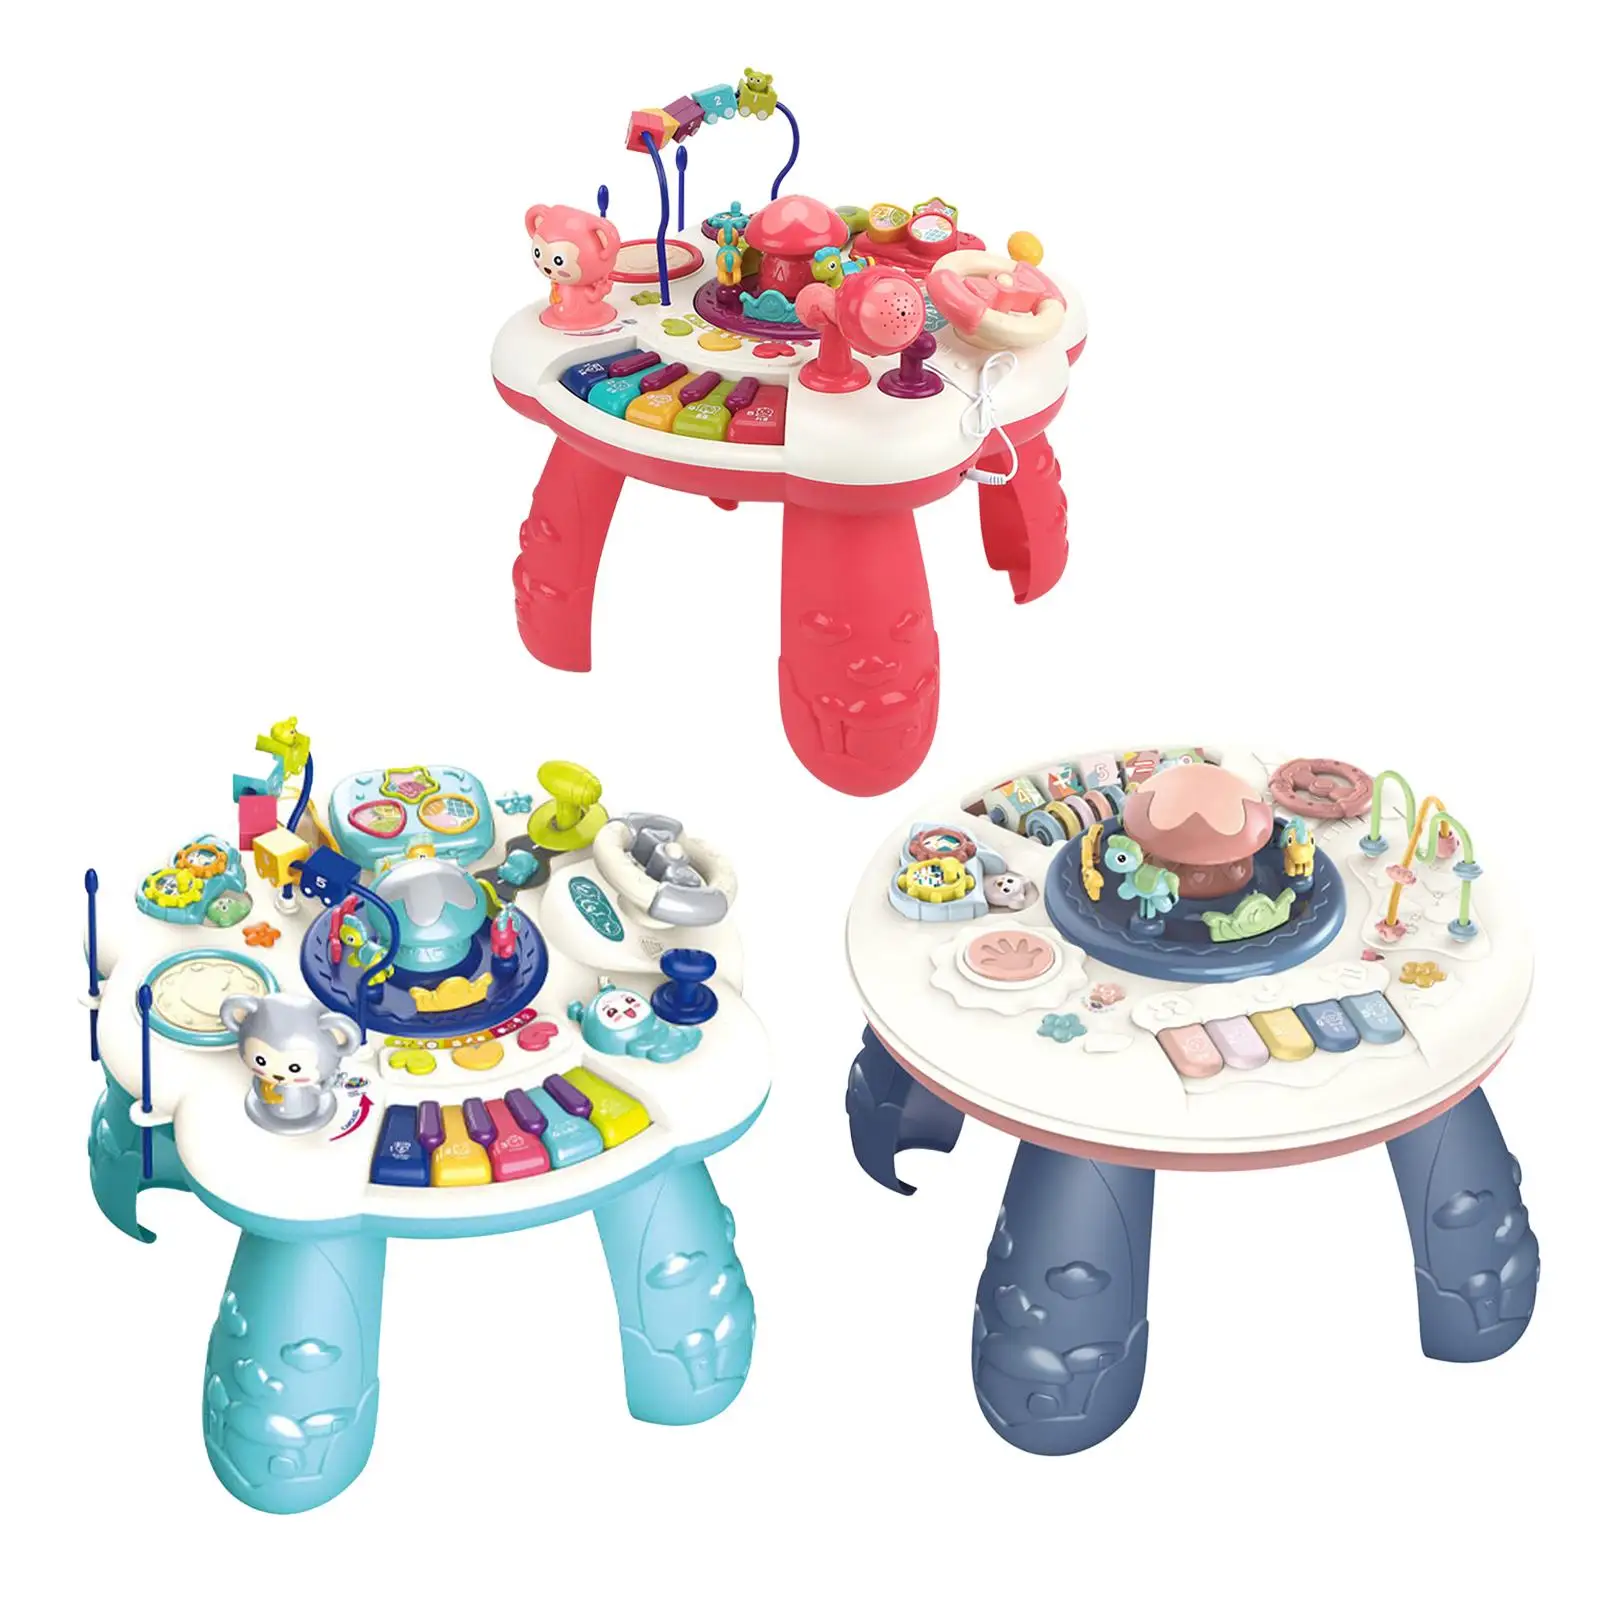 Musical Learning Activity Table Sensory Sound Toy Games with Light for Infants